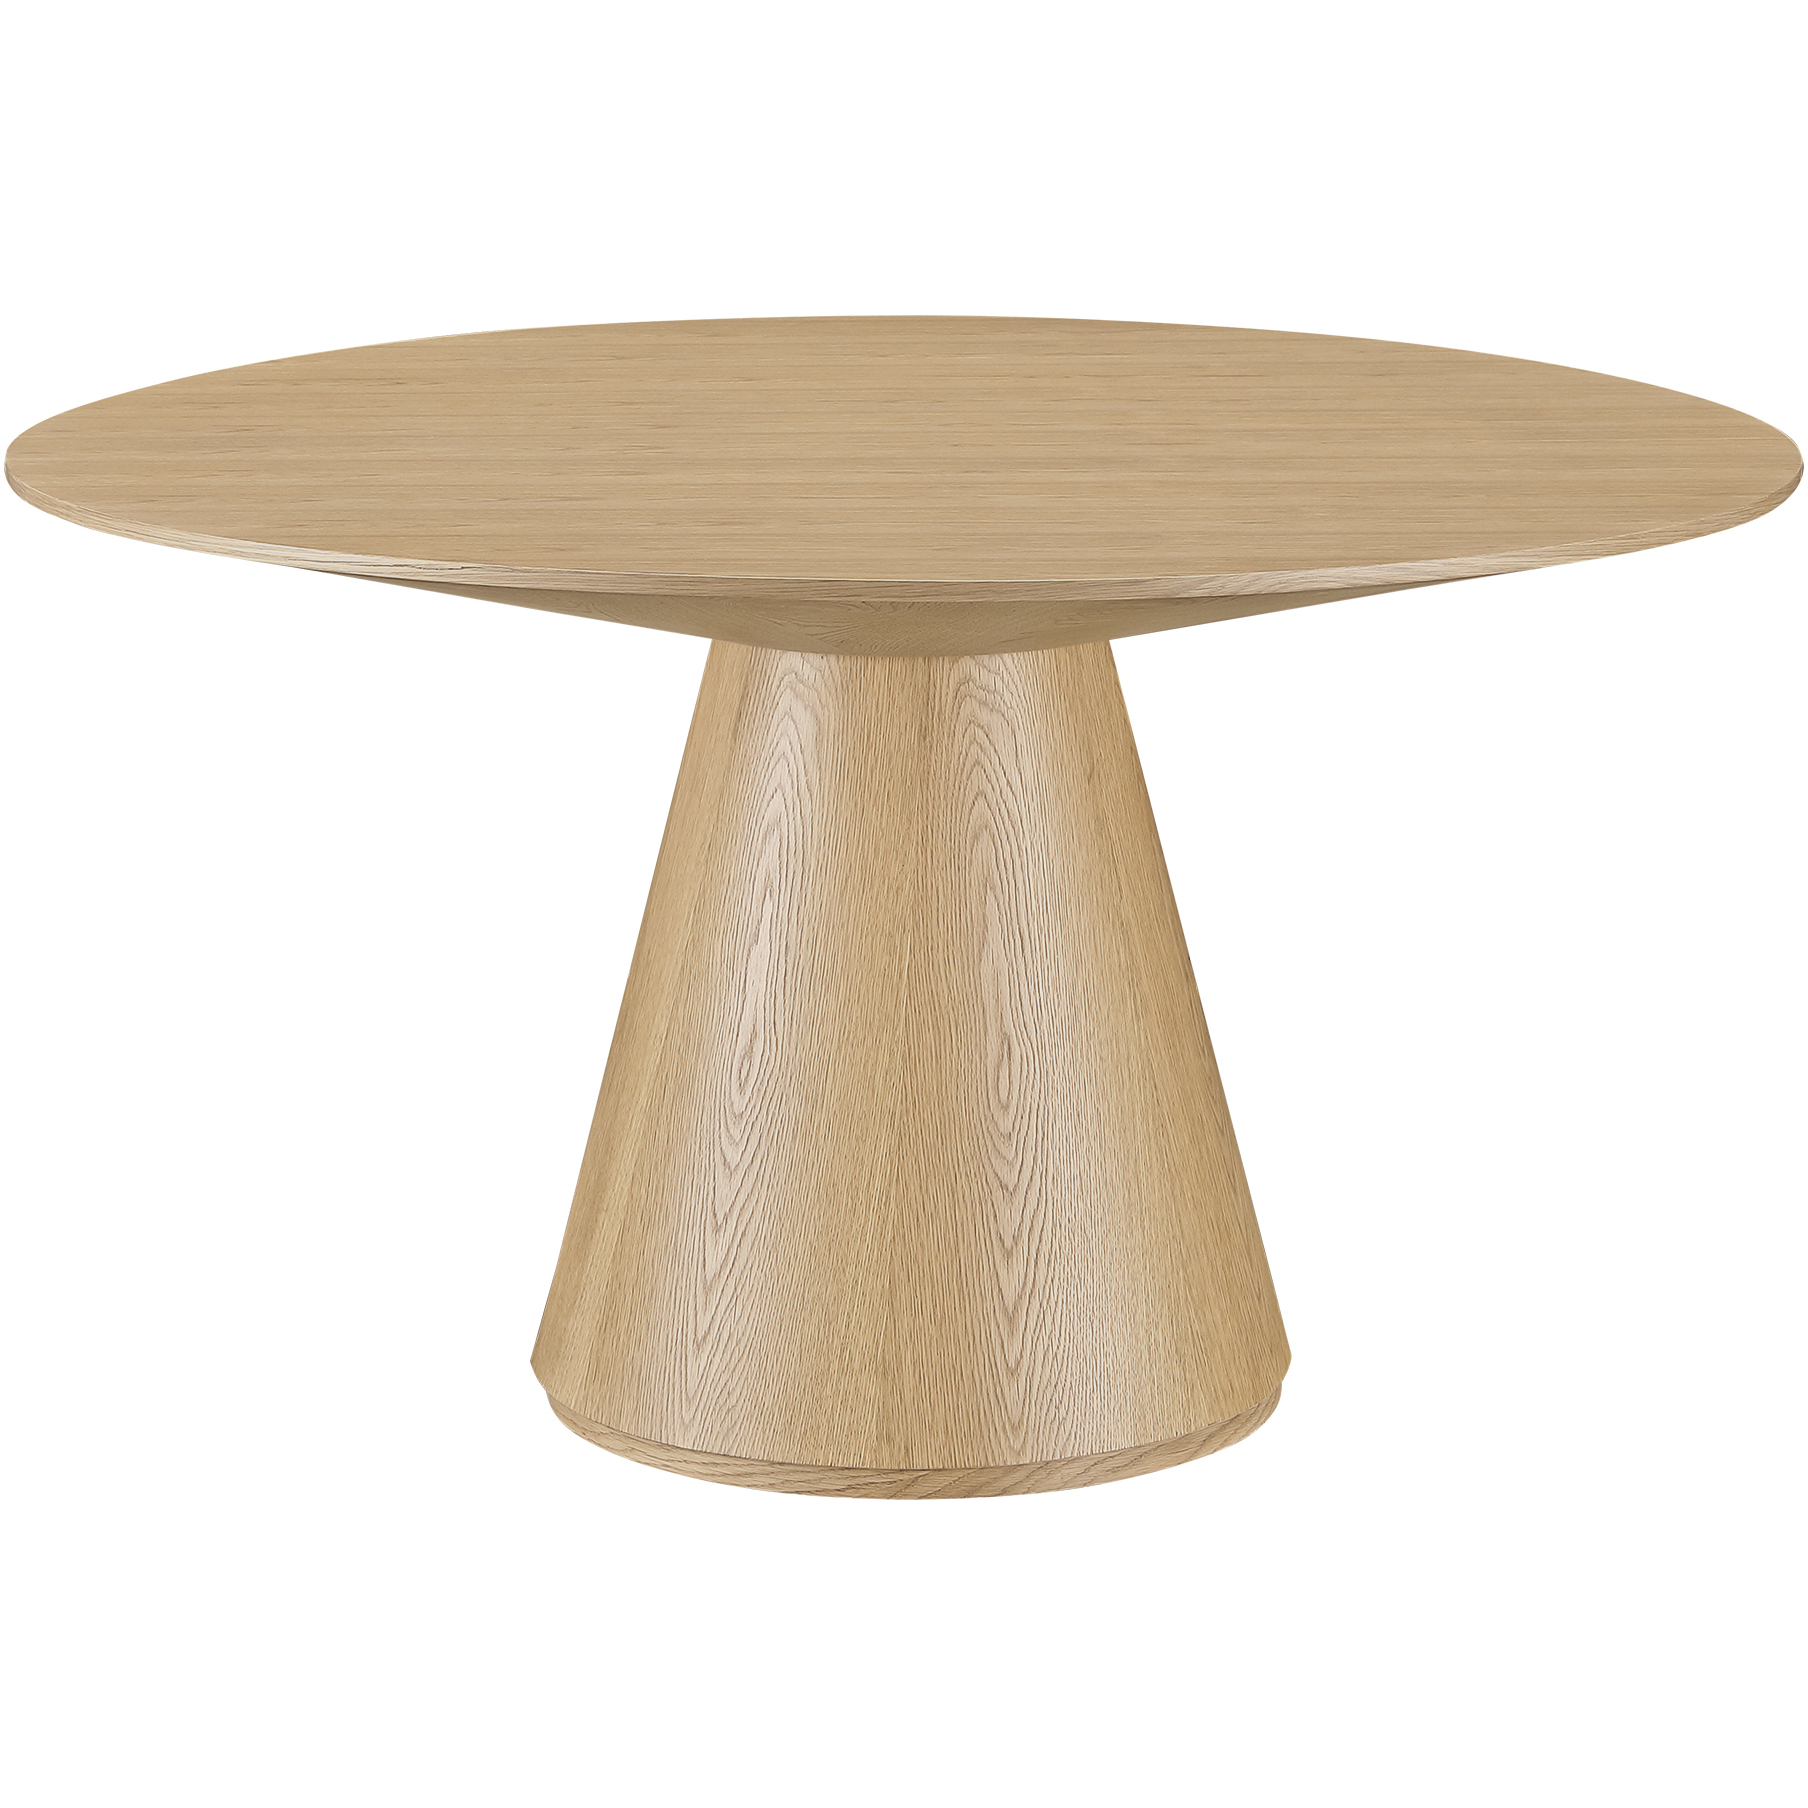 Moe's Home Collection KC-1028-24 Otago 47 X 47 inch Oak Dining Table, Round